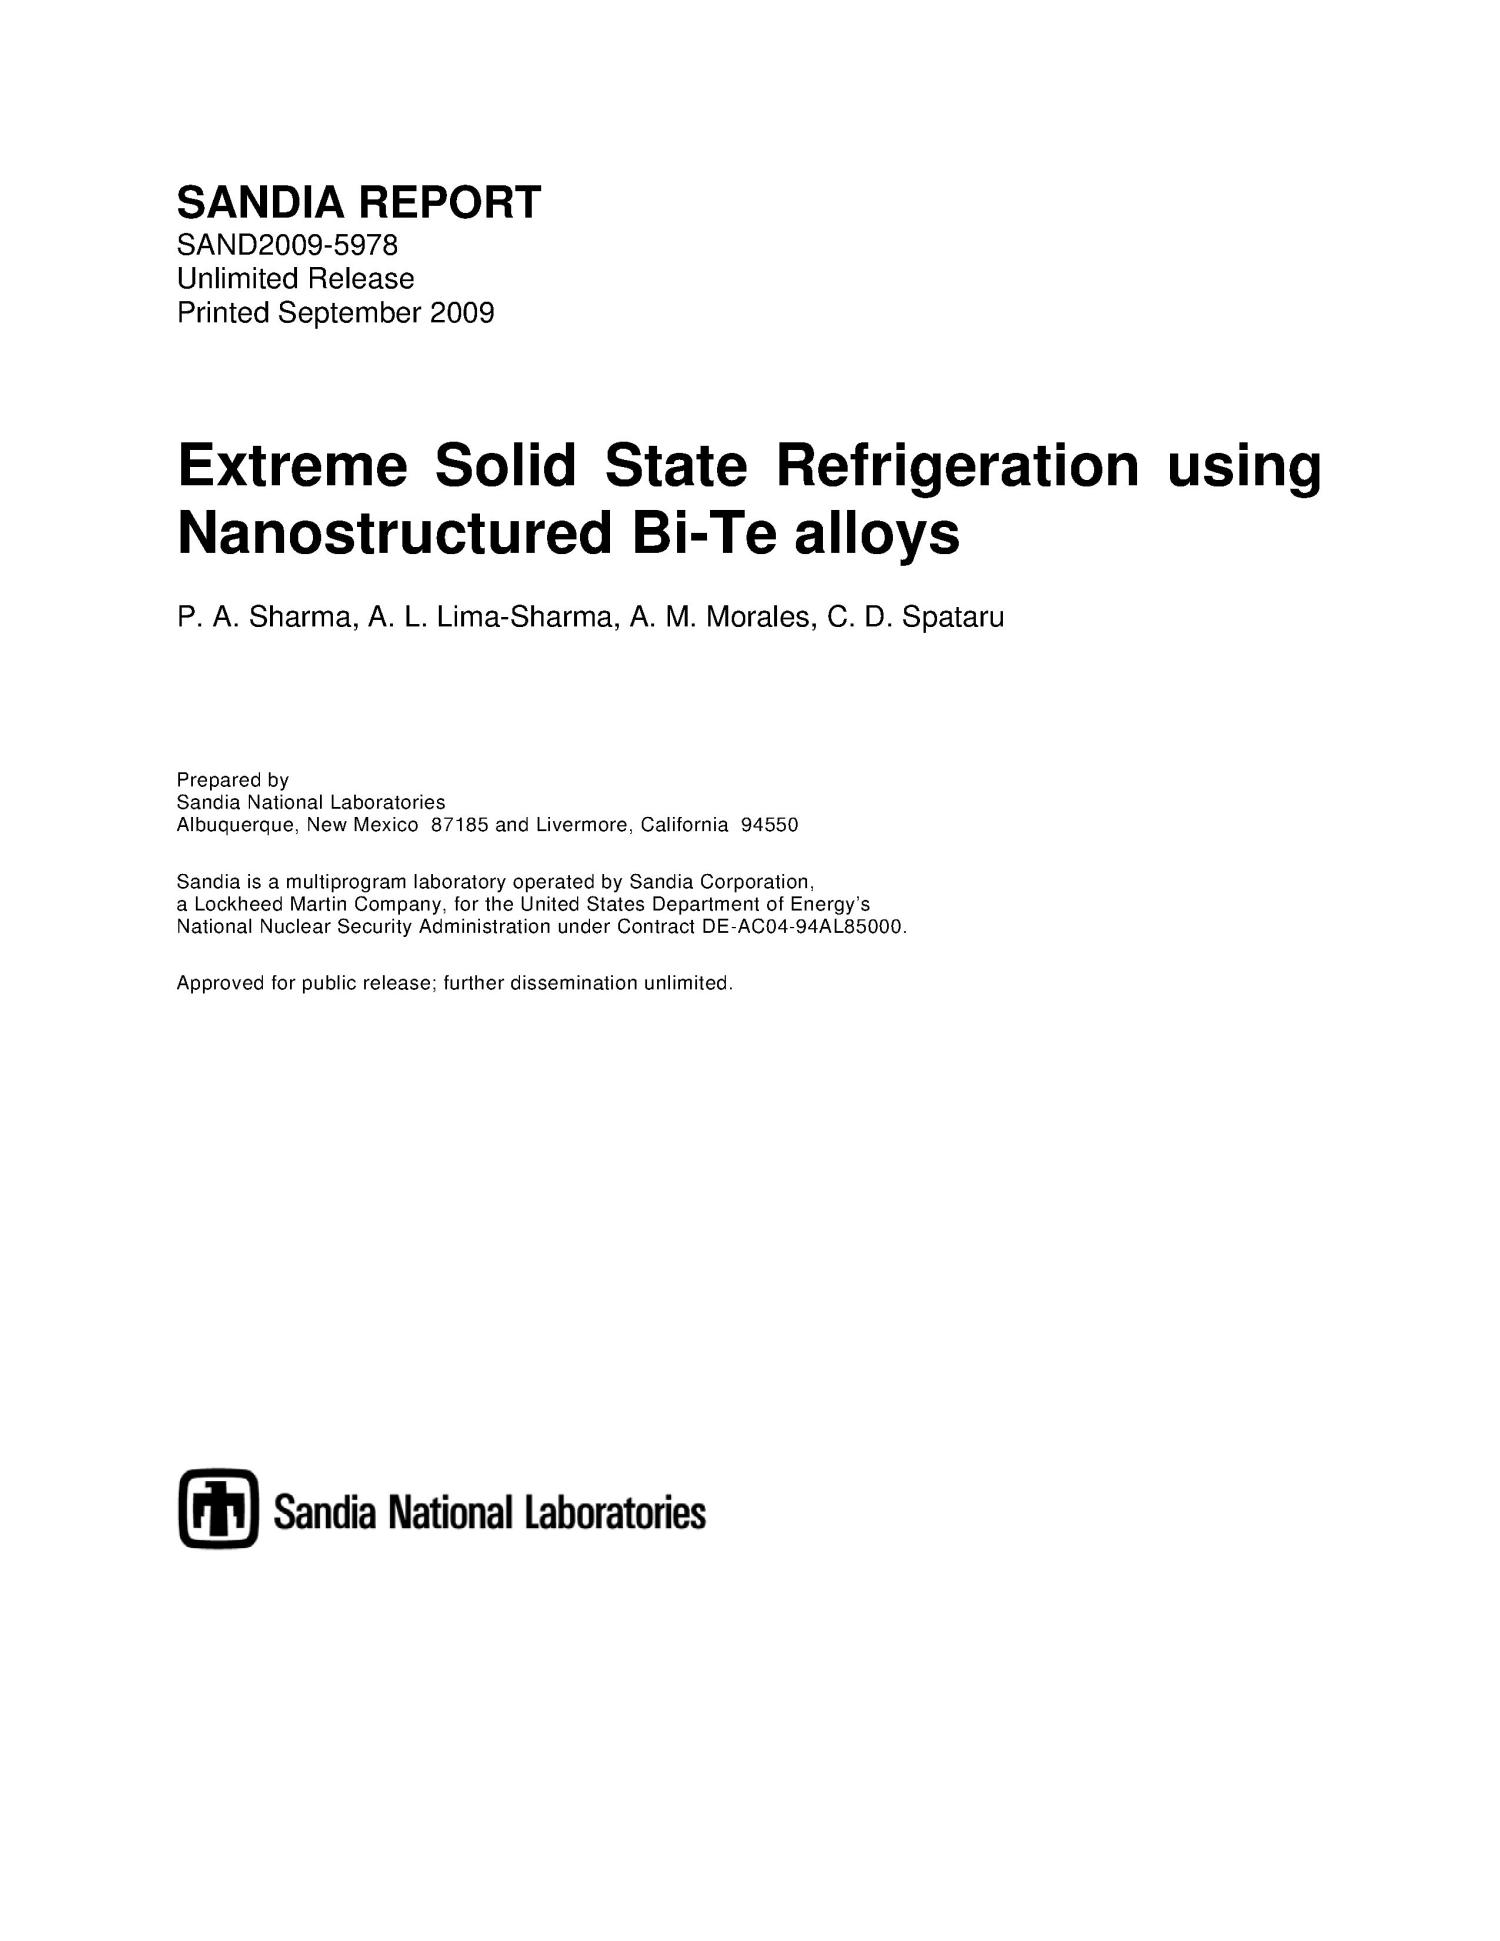 solid state refrigeration